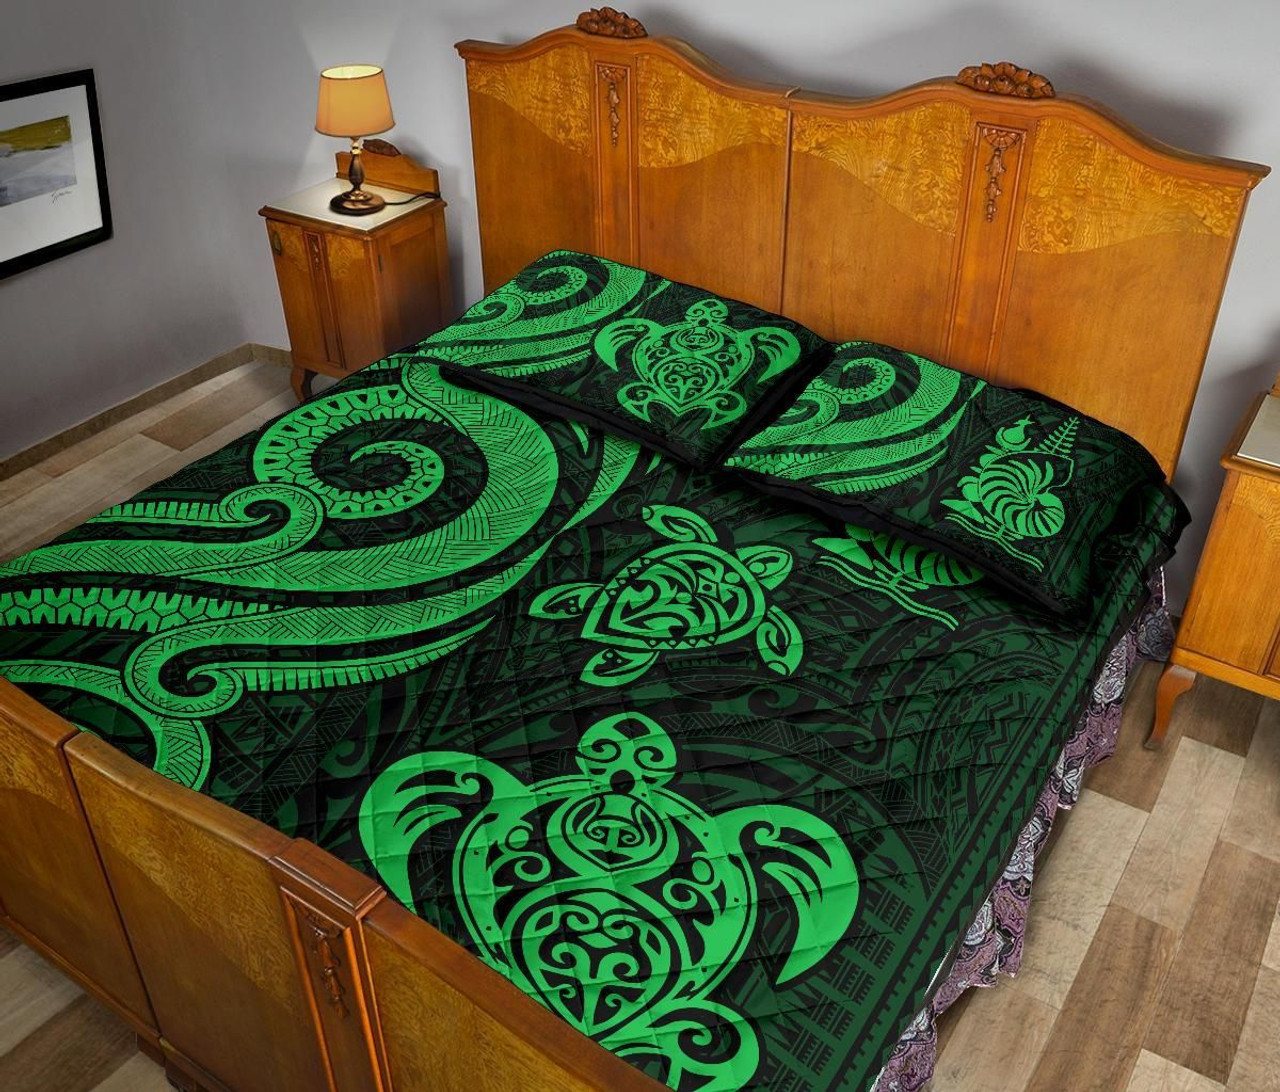 New Caledonia Quilt Bed Set - Green Tentacle Turtle 4